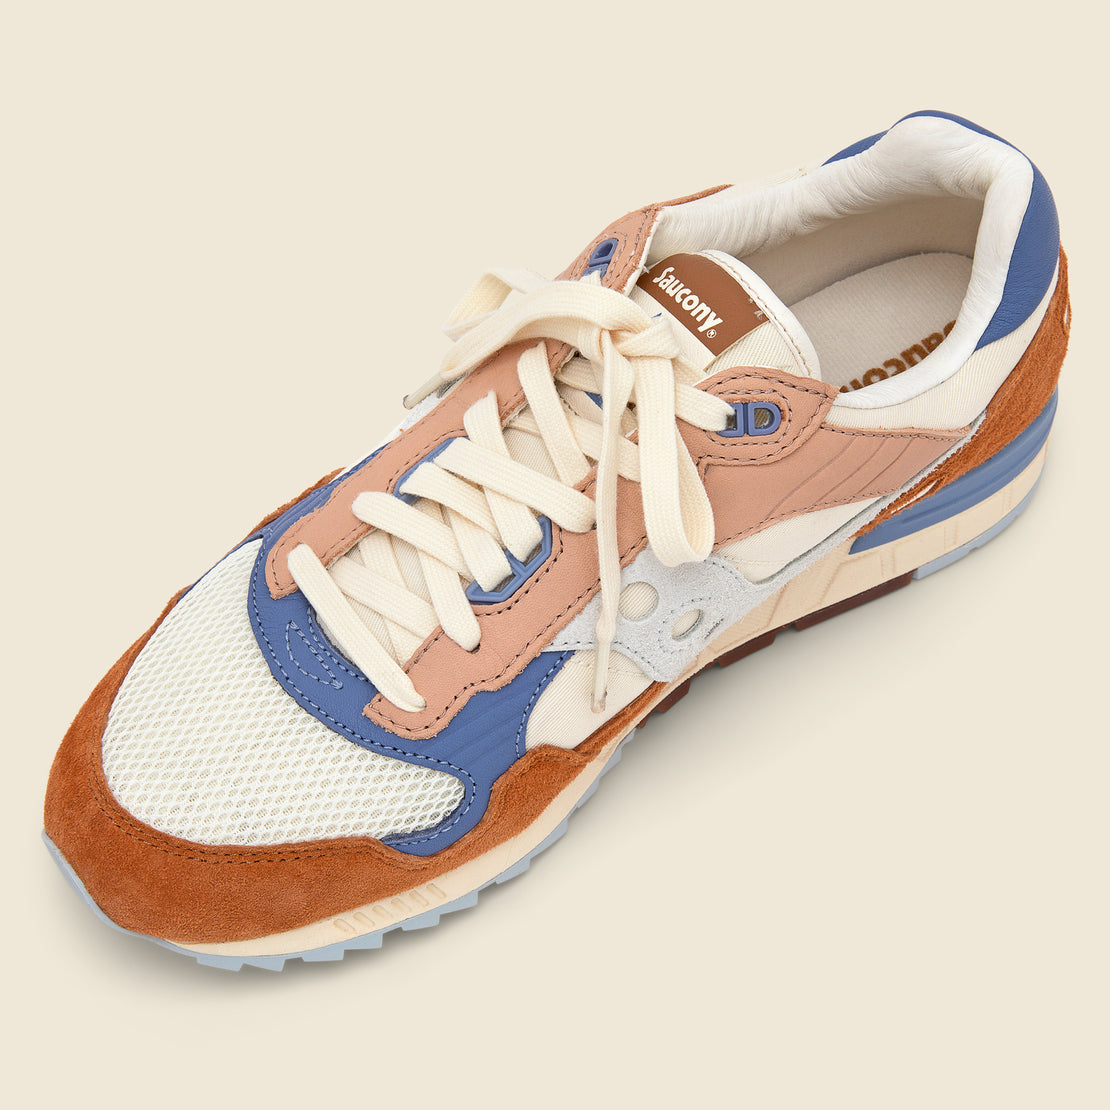 Shadow 5000 Premium Sneaker - Orange/Blue/White - Saucony - STAG Provisions - Shoes - Athletic